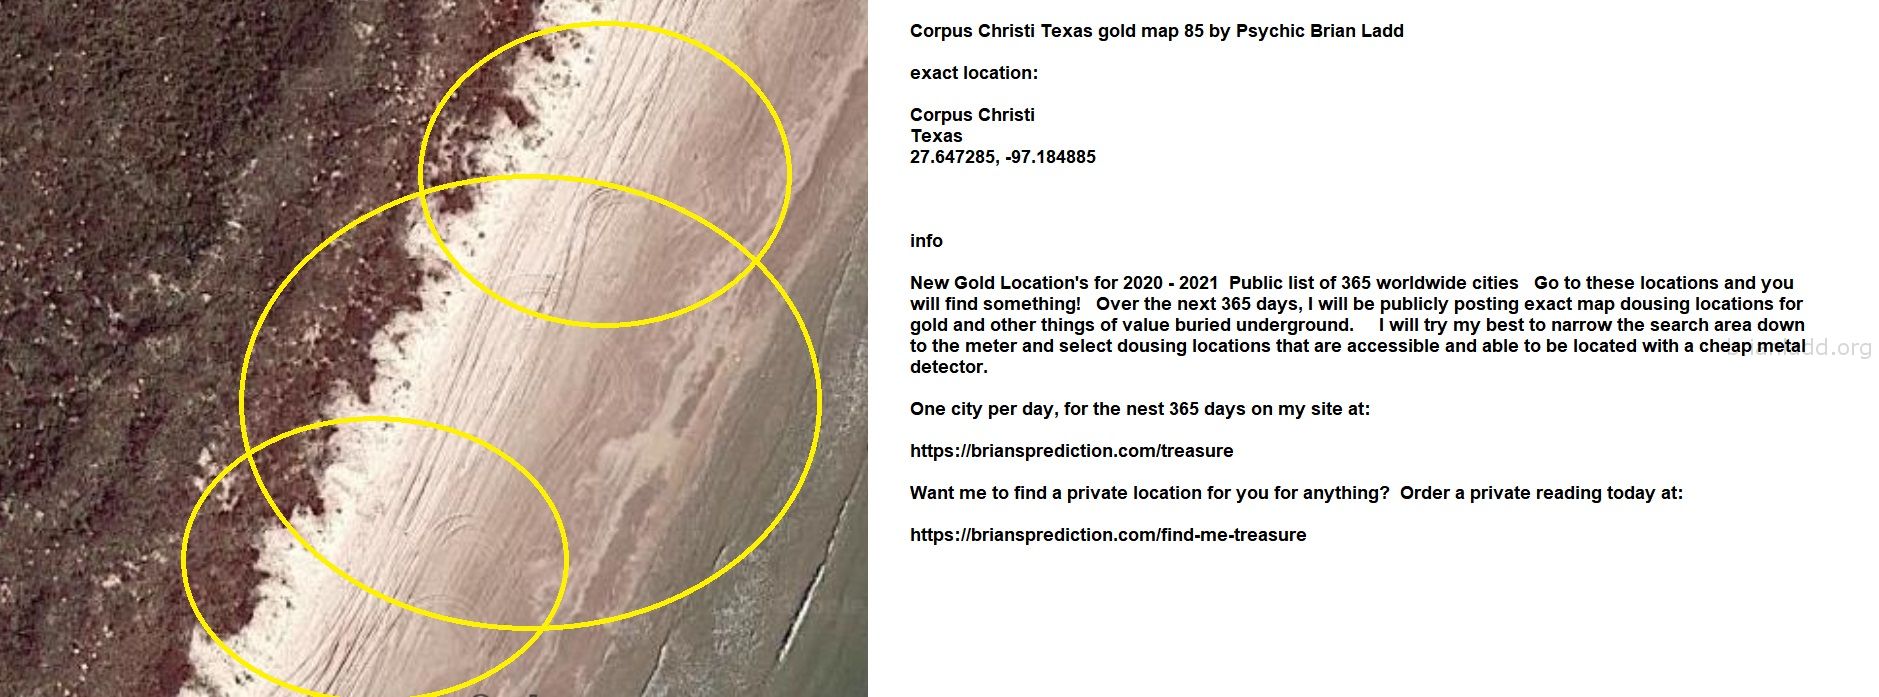 Corpus Christi Texas gold map 85 by Psychic Brian Ladd
New Gold Location's for 2020 - 2021  Public list of 365 worldwide cities   Go to these locations and you will find something!   Over the next 365 days, I will be publicly posting exact map dousing locations for gold and other things of value buried underground.     I will try my best to narrow the search area down to the meter and select dousing locations that are accessible and able to be located with a cheap metal detector. One city per day, for the nest 365 days on my site at:  https://briansprediction.com/treasure  Want me to find a private location for you for anything?  Order a private reading today at:  https://briansprediction.com/find-me-treasure
